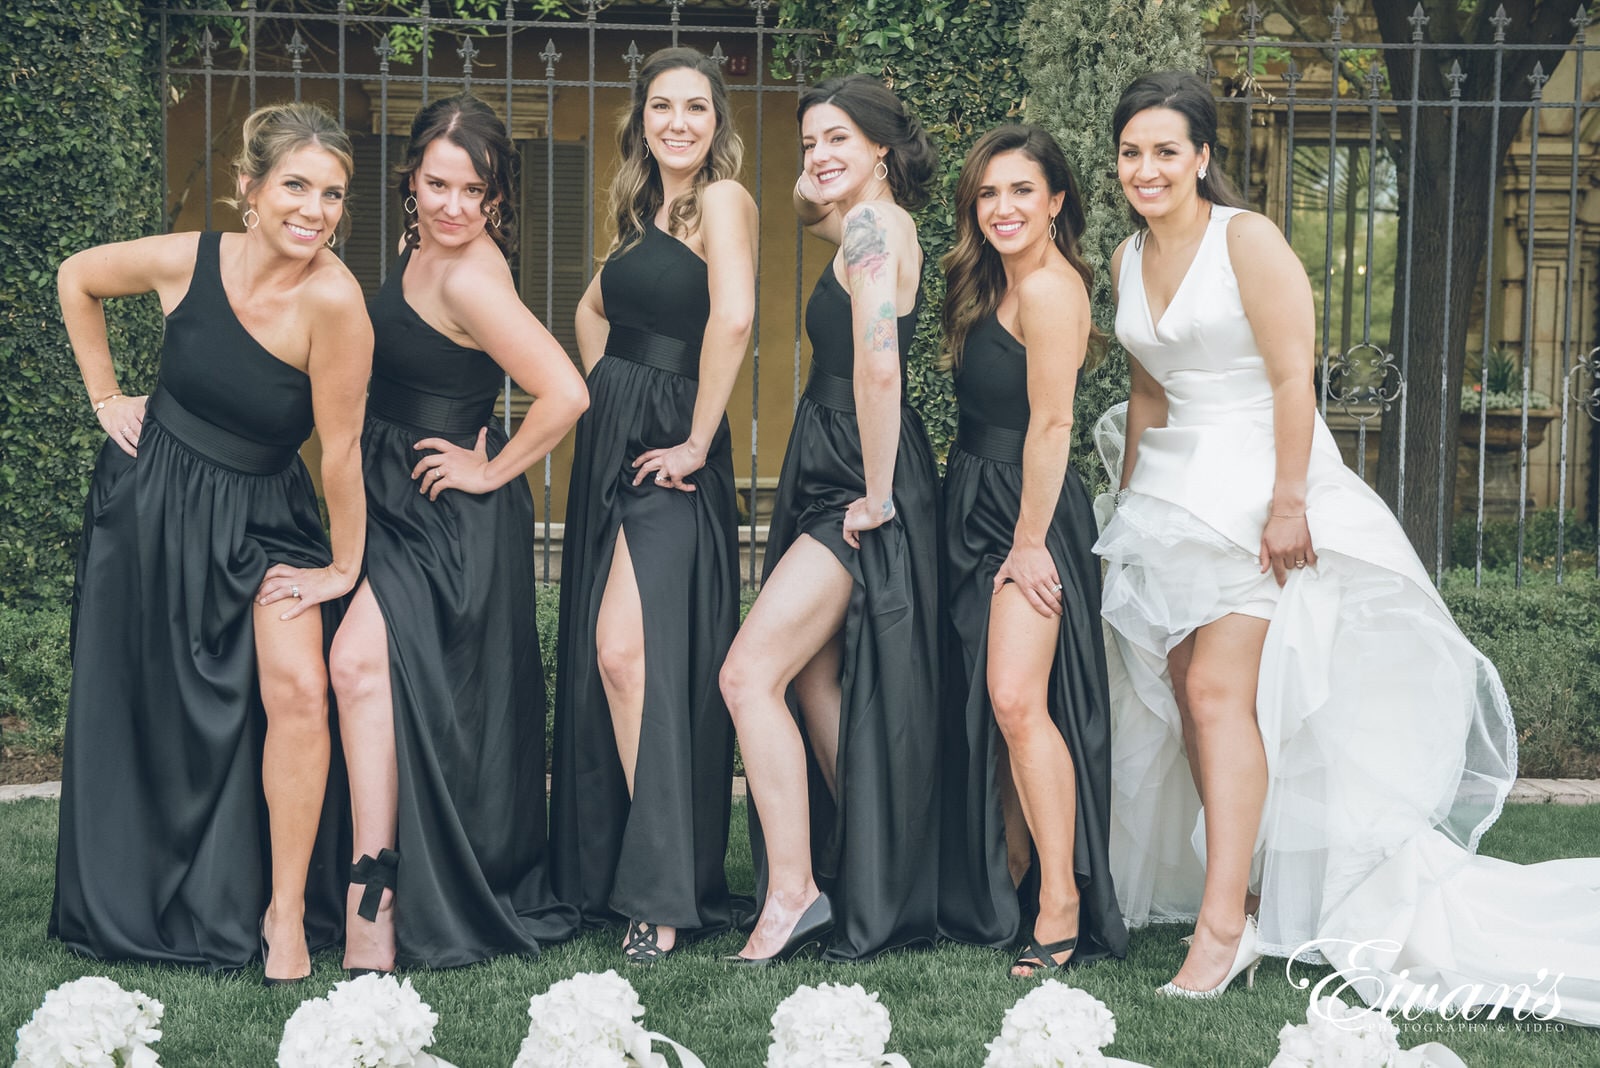 six woman with their dresses up to expose their leg